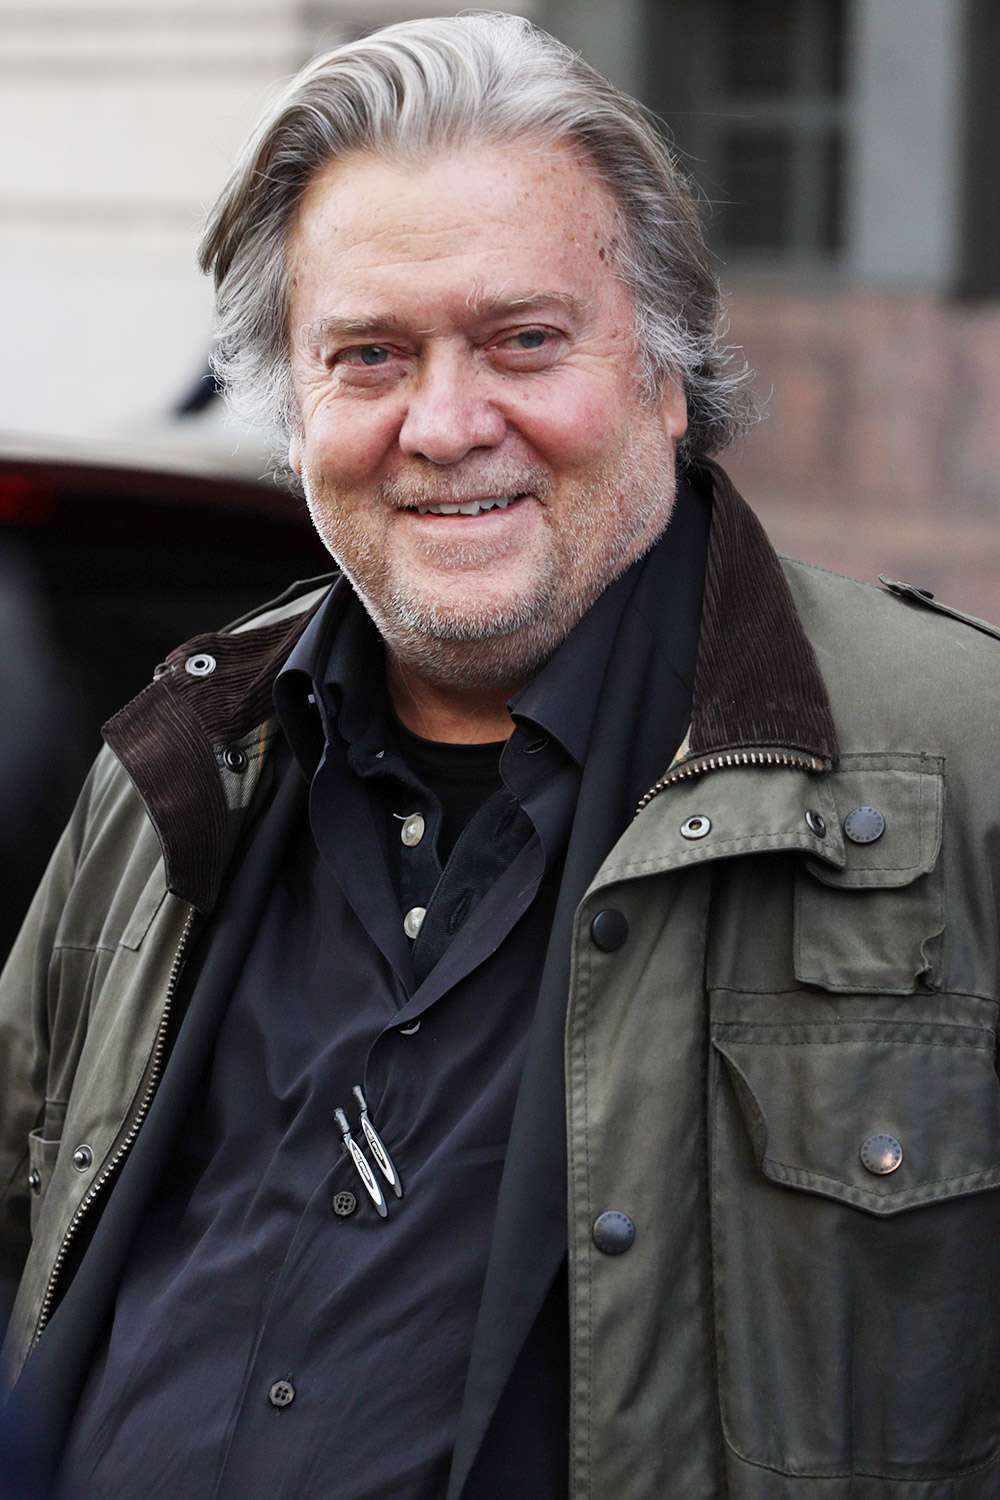 The Serious Side - part 8 - Page 15 Image?url=https%3A%2F%2Fstatic.onecms.io%2Fwp-content%2Fuploads%2Fsites%2F20%2F2019%2F12%2Fsteve-bannon